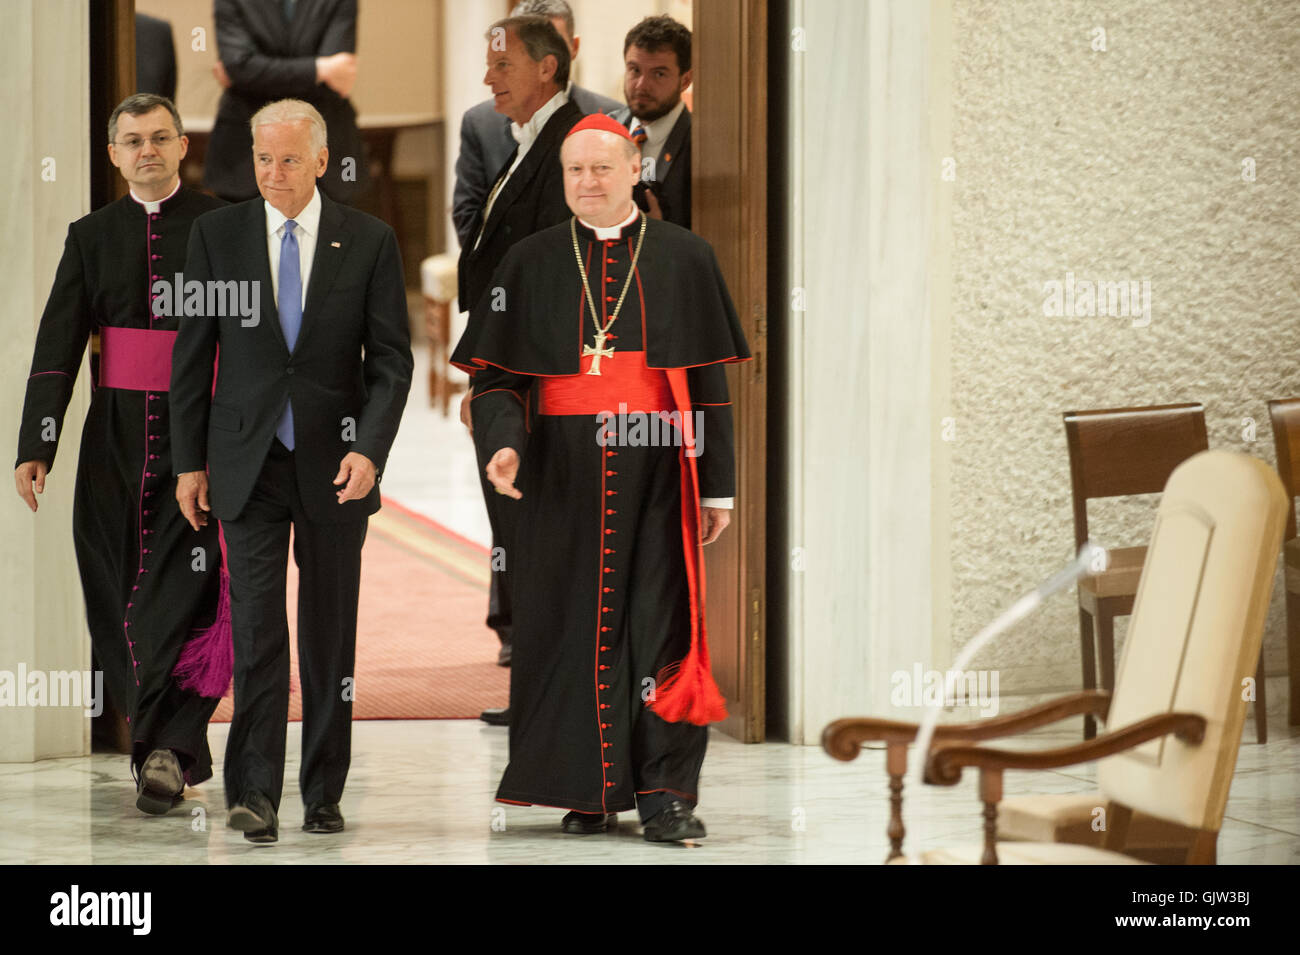 Pope Francis and U.S. Vice-President Joe Biden attend the International Conference on the Progress of Regenerative Medicine and It's Cultural Impact held at the Vatican  Featuring: Joe Biden Where: Rome, Italy When: 29 Apr 2016 Credit: IPA/WENN.com  **Onl Stock Photo